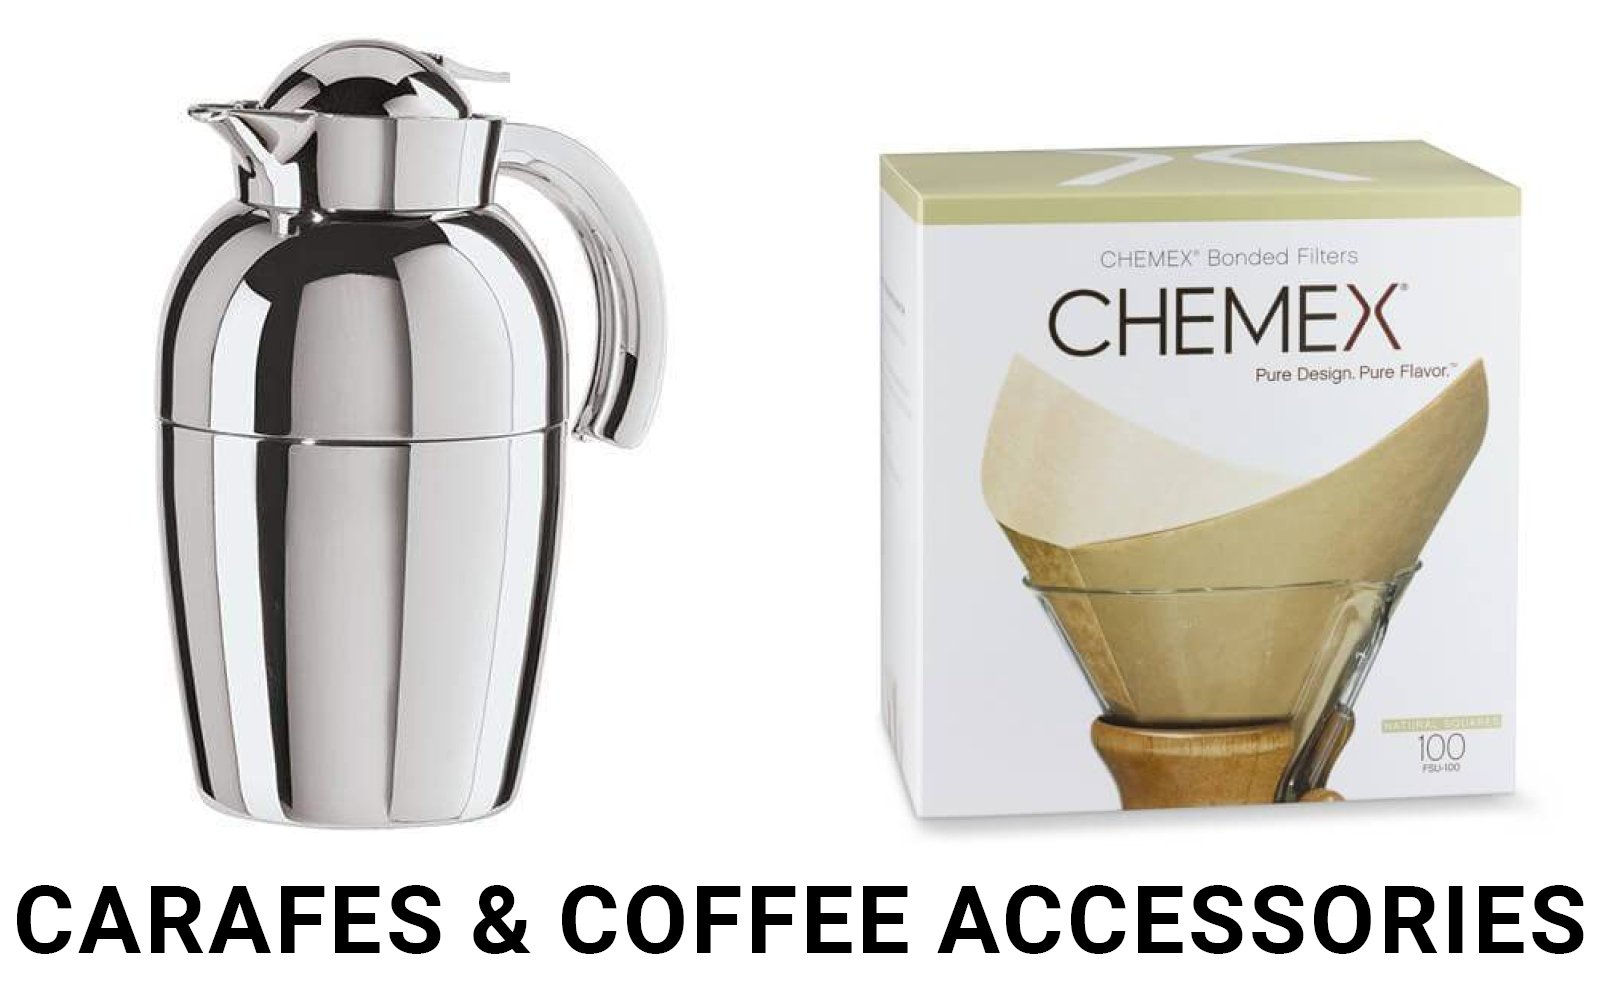 Carafes & Coffee Accessories